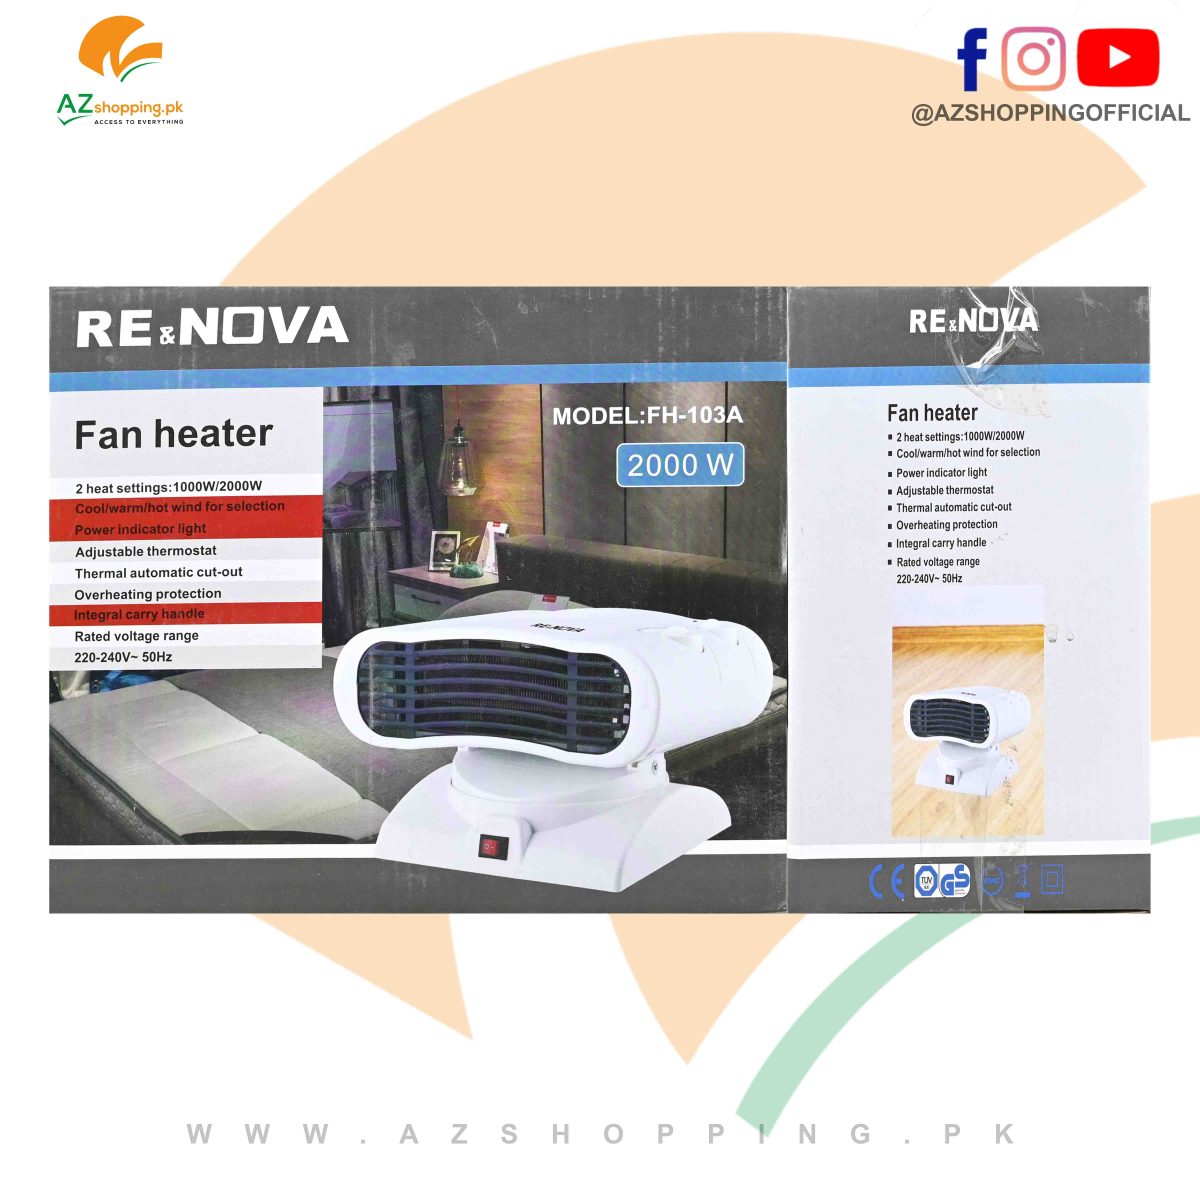 Renova – Fan Heater Air Blower 180 Degree Rotation 1000W/2000W with 2 Heat Settings, Cool/warm/hot wind selection, Adjustable Thermostat – Model: FH-103A